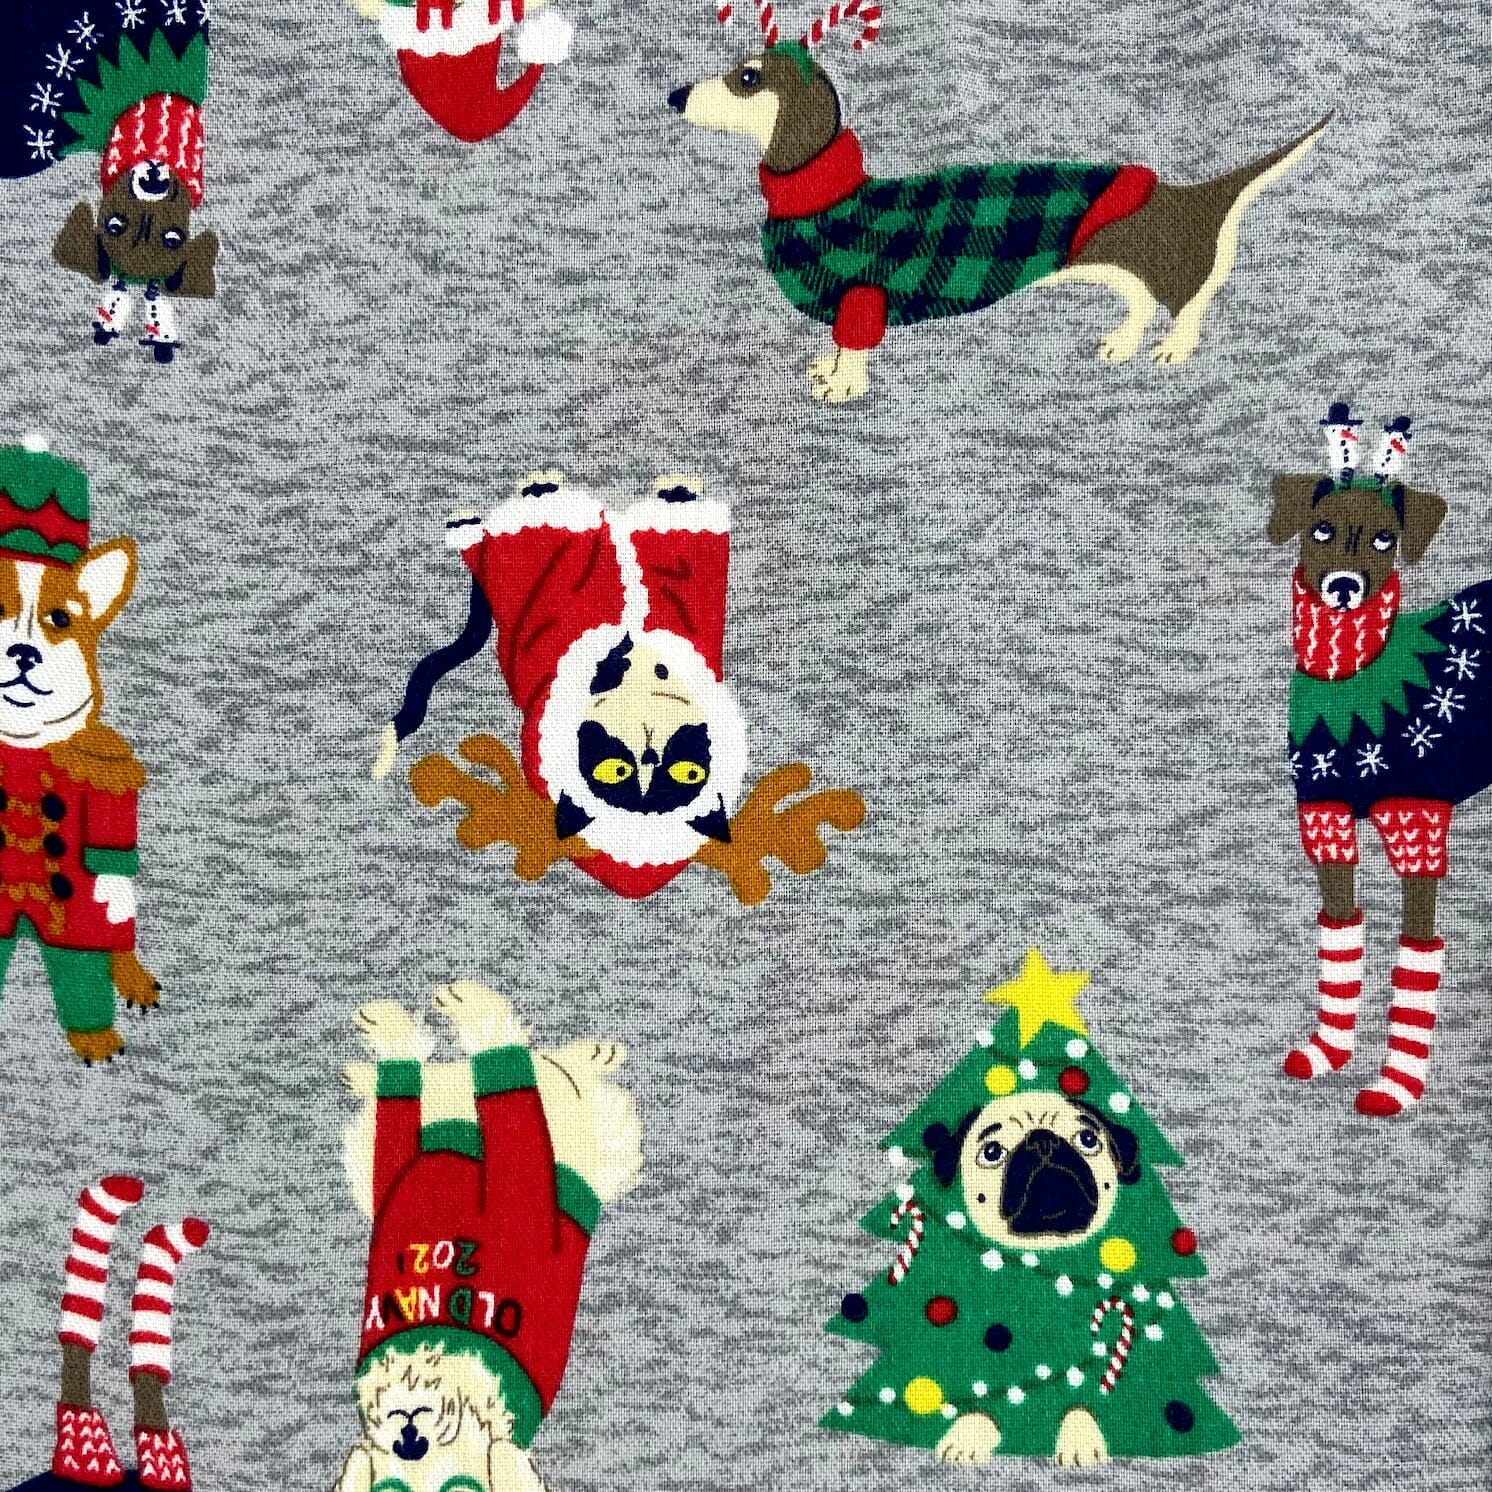 Men's Christmas Festive Cats and Dogs Patterned Long Pajama Pants